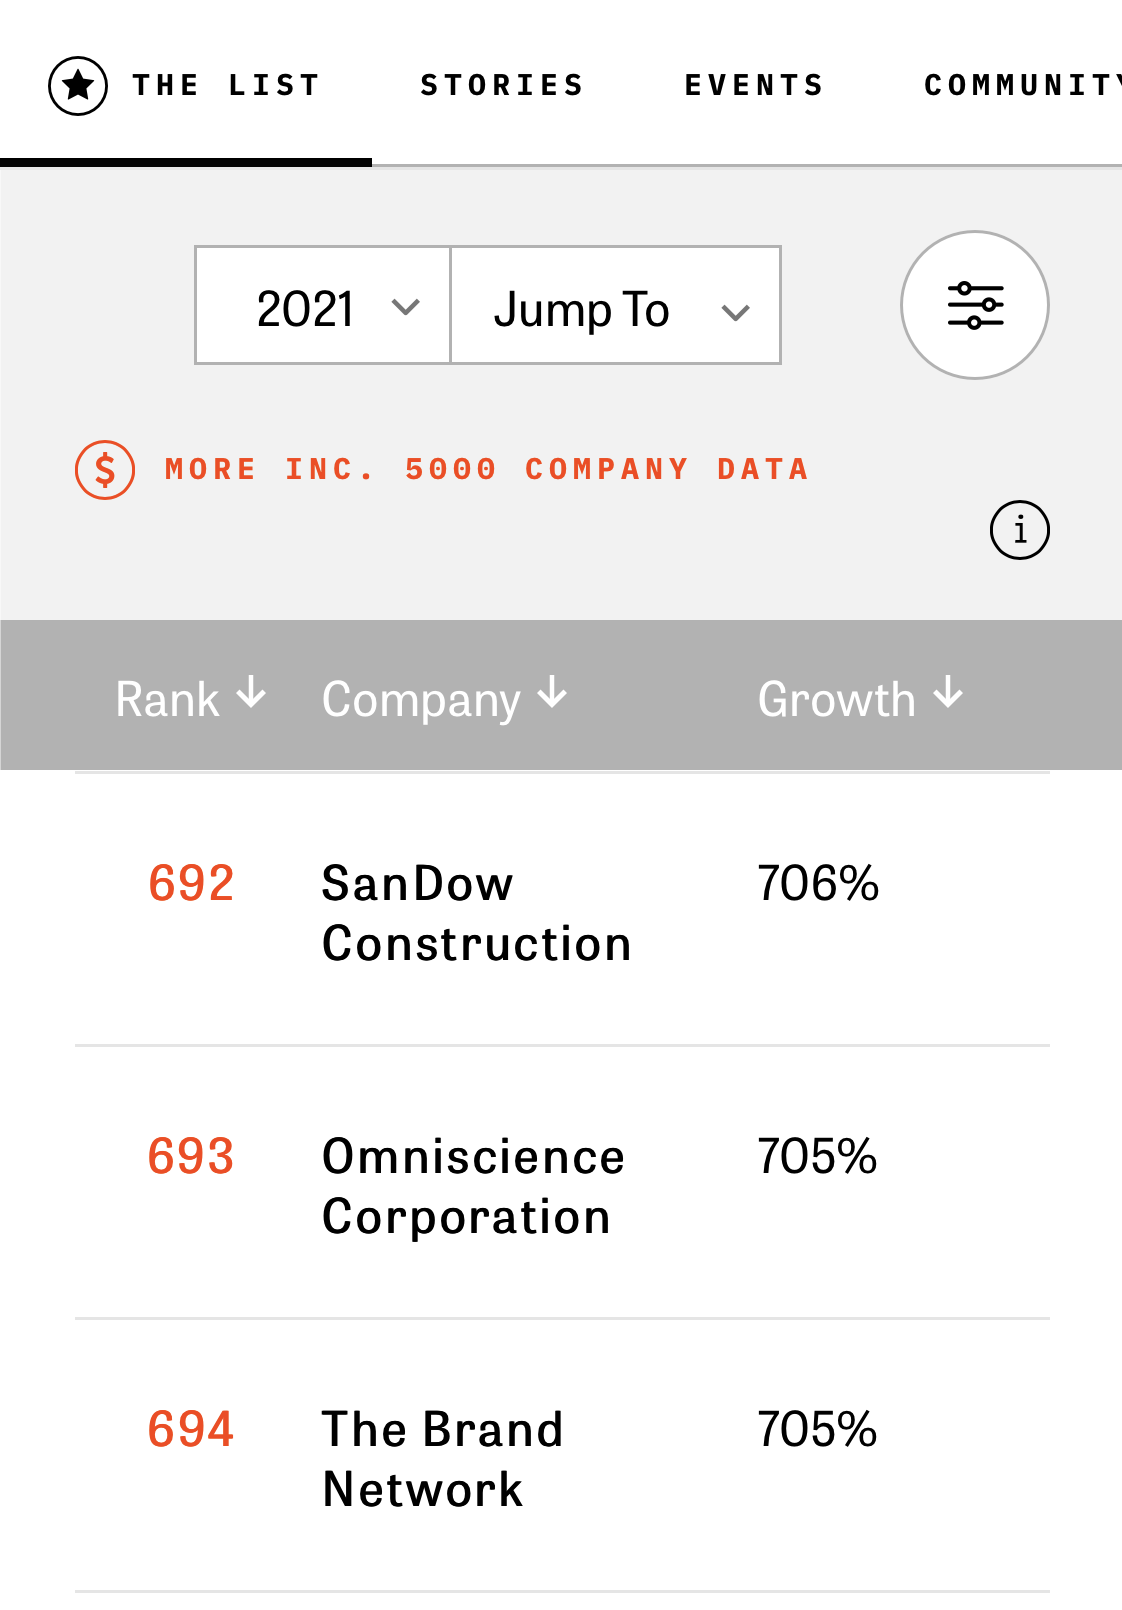 SanDow Construction rank and growth rising through time.